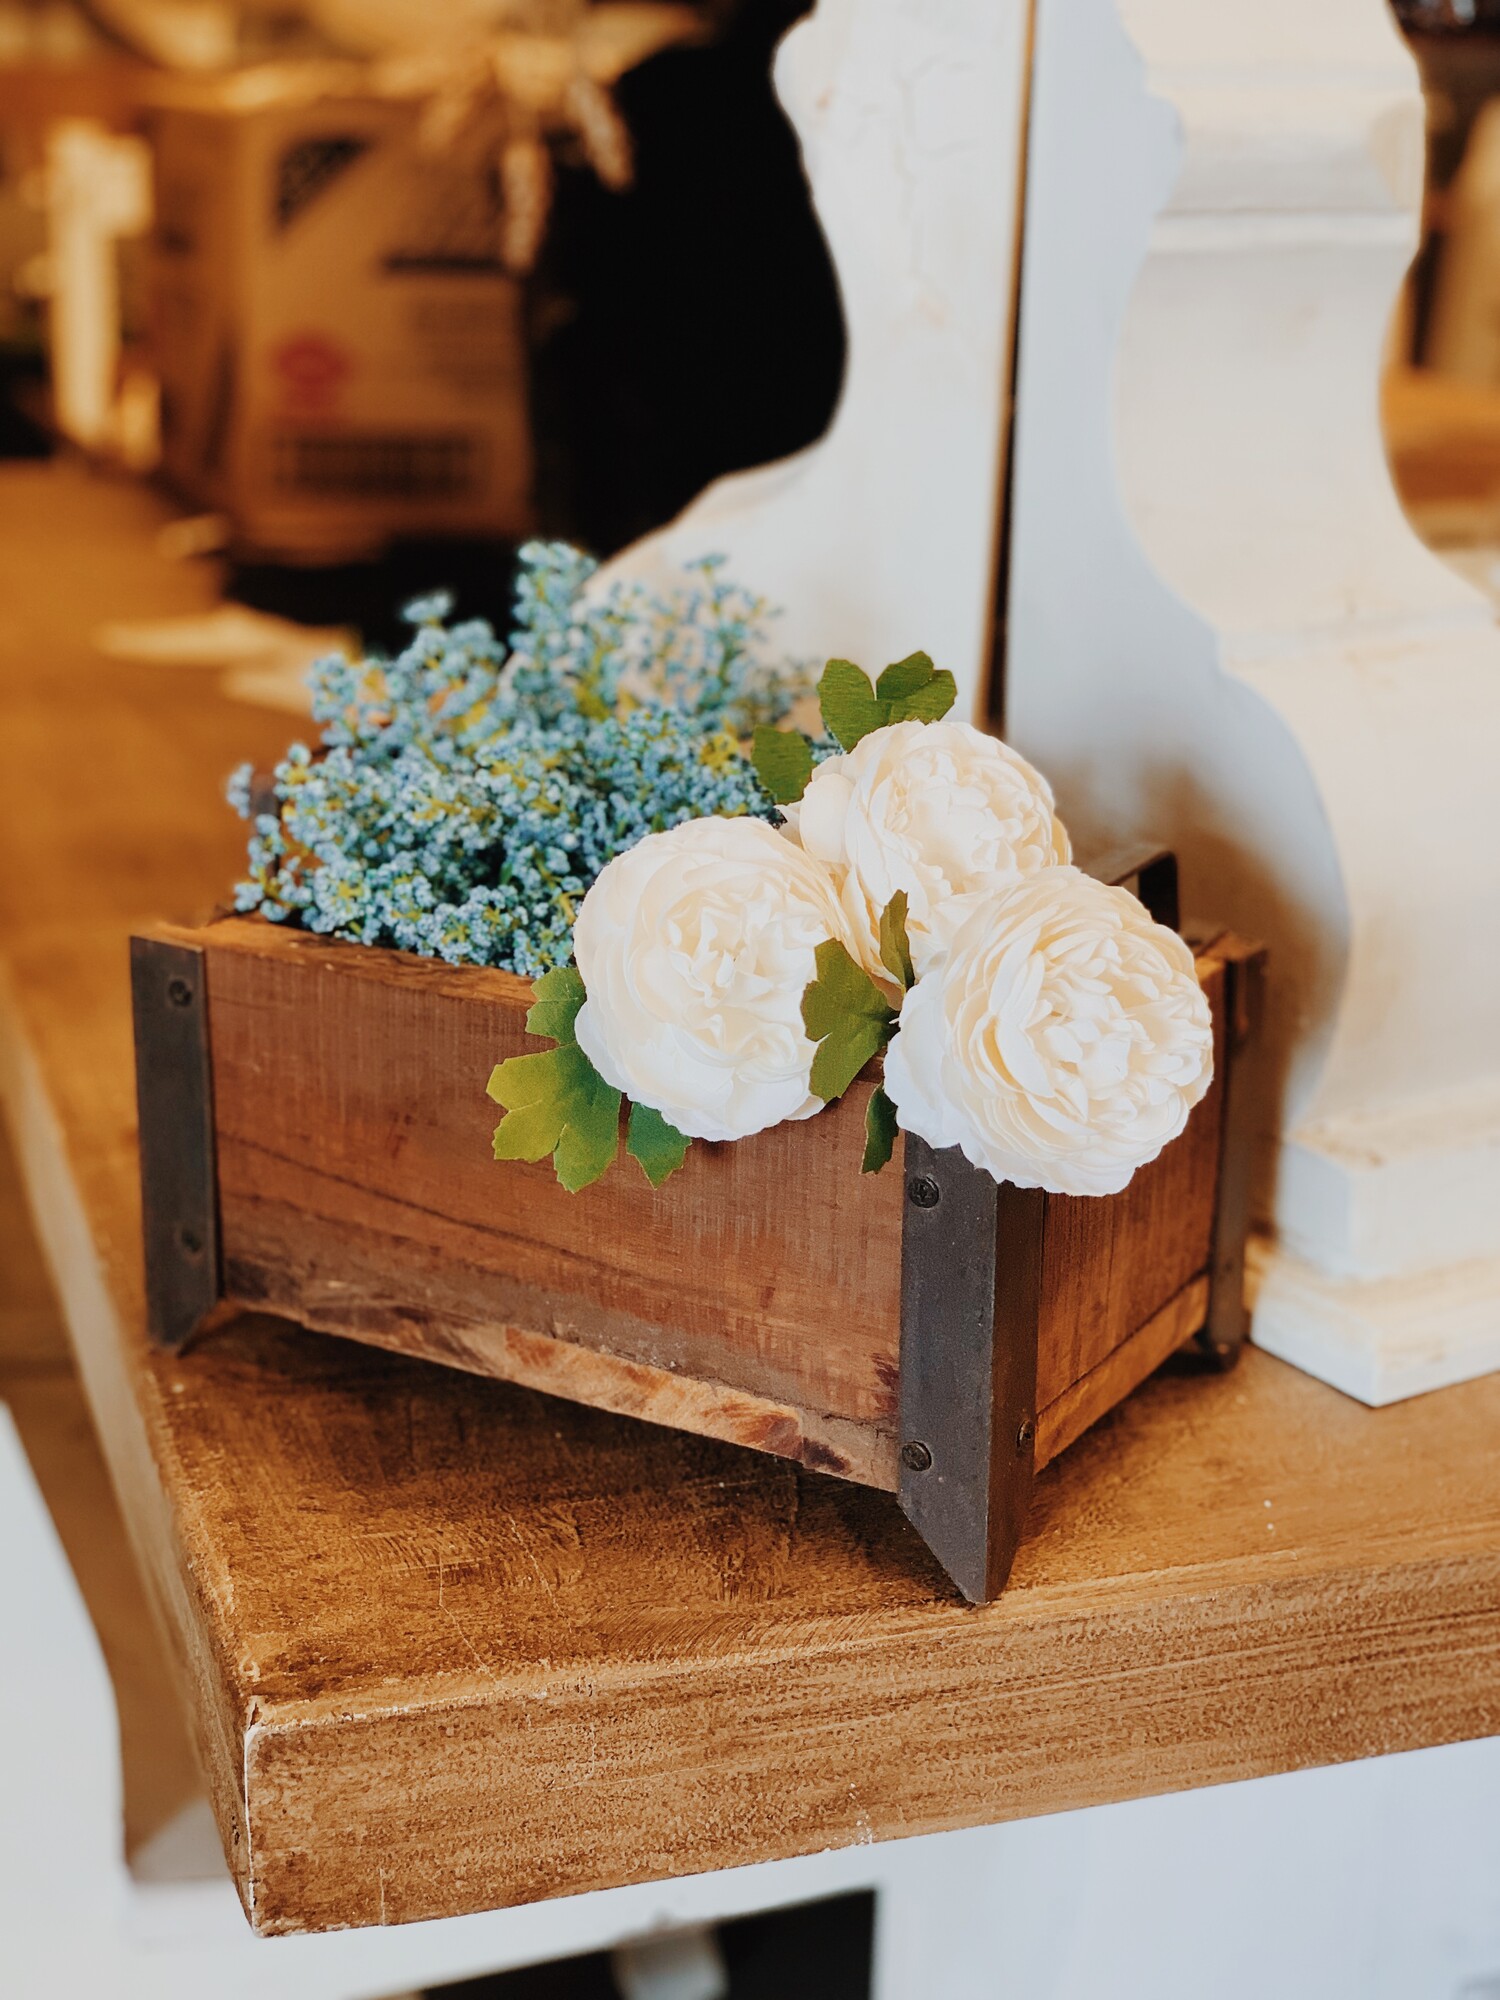 These wooden boxes are perfect paired with florals in any space! They measure 5 inches tall with 1.5 inch high metal handles, 10.5 inches wide, and 6.5 inches deep.